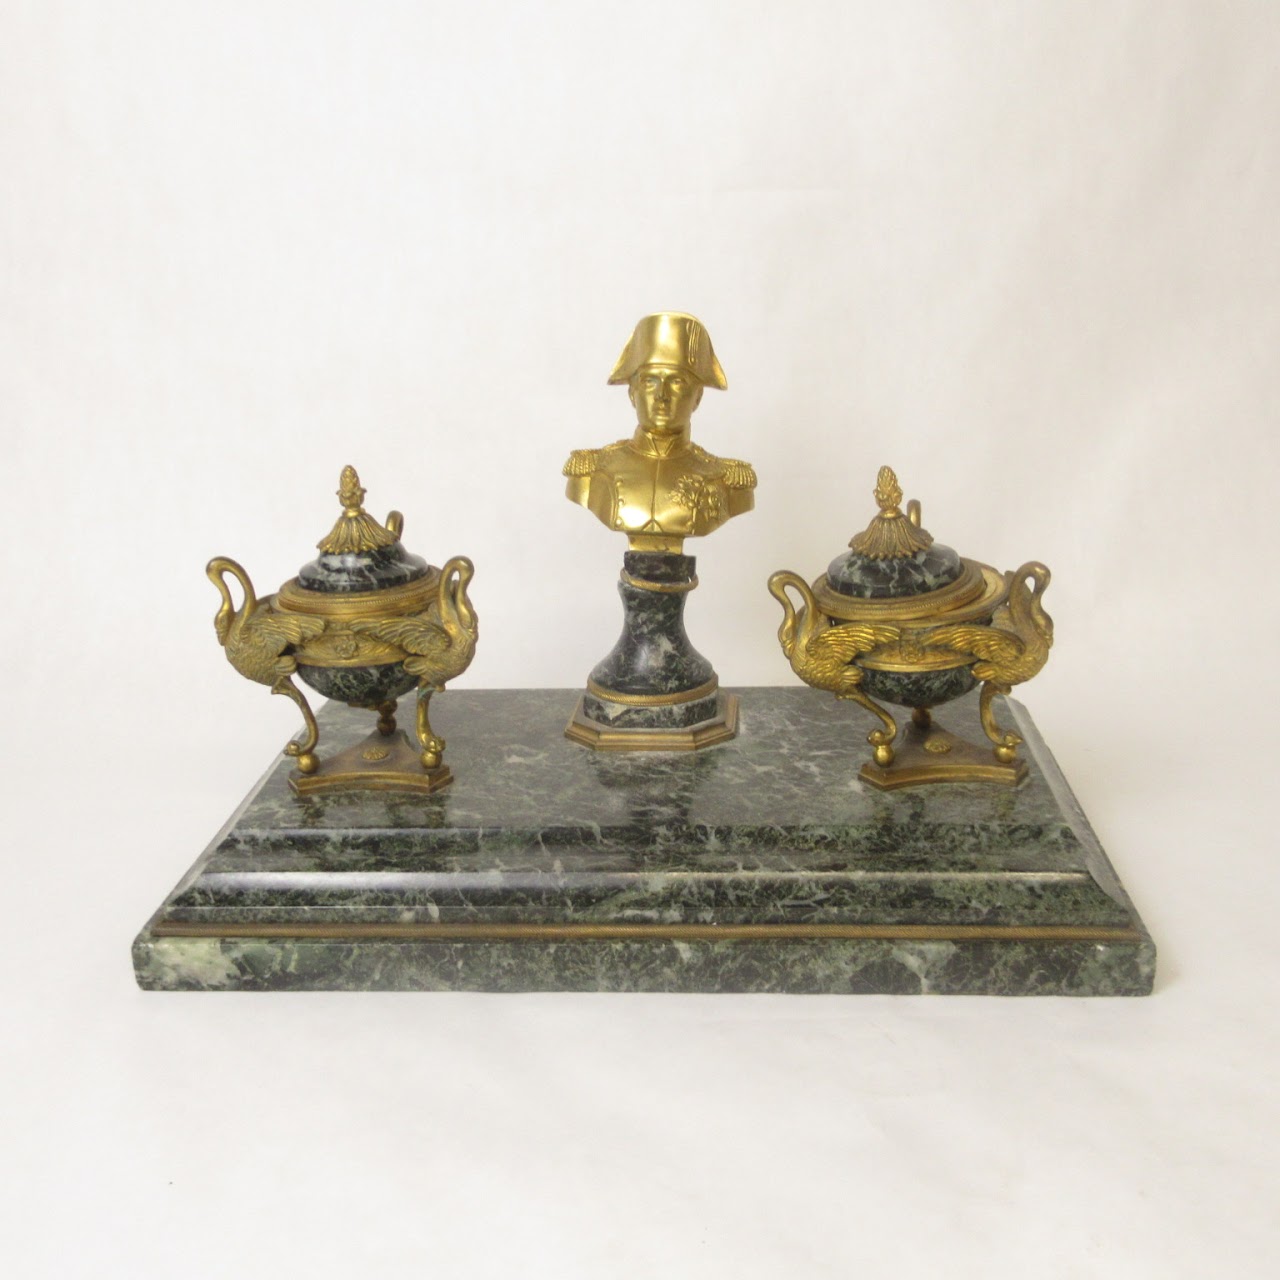 Napoleon Inkwell with a base - Bronze